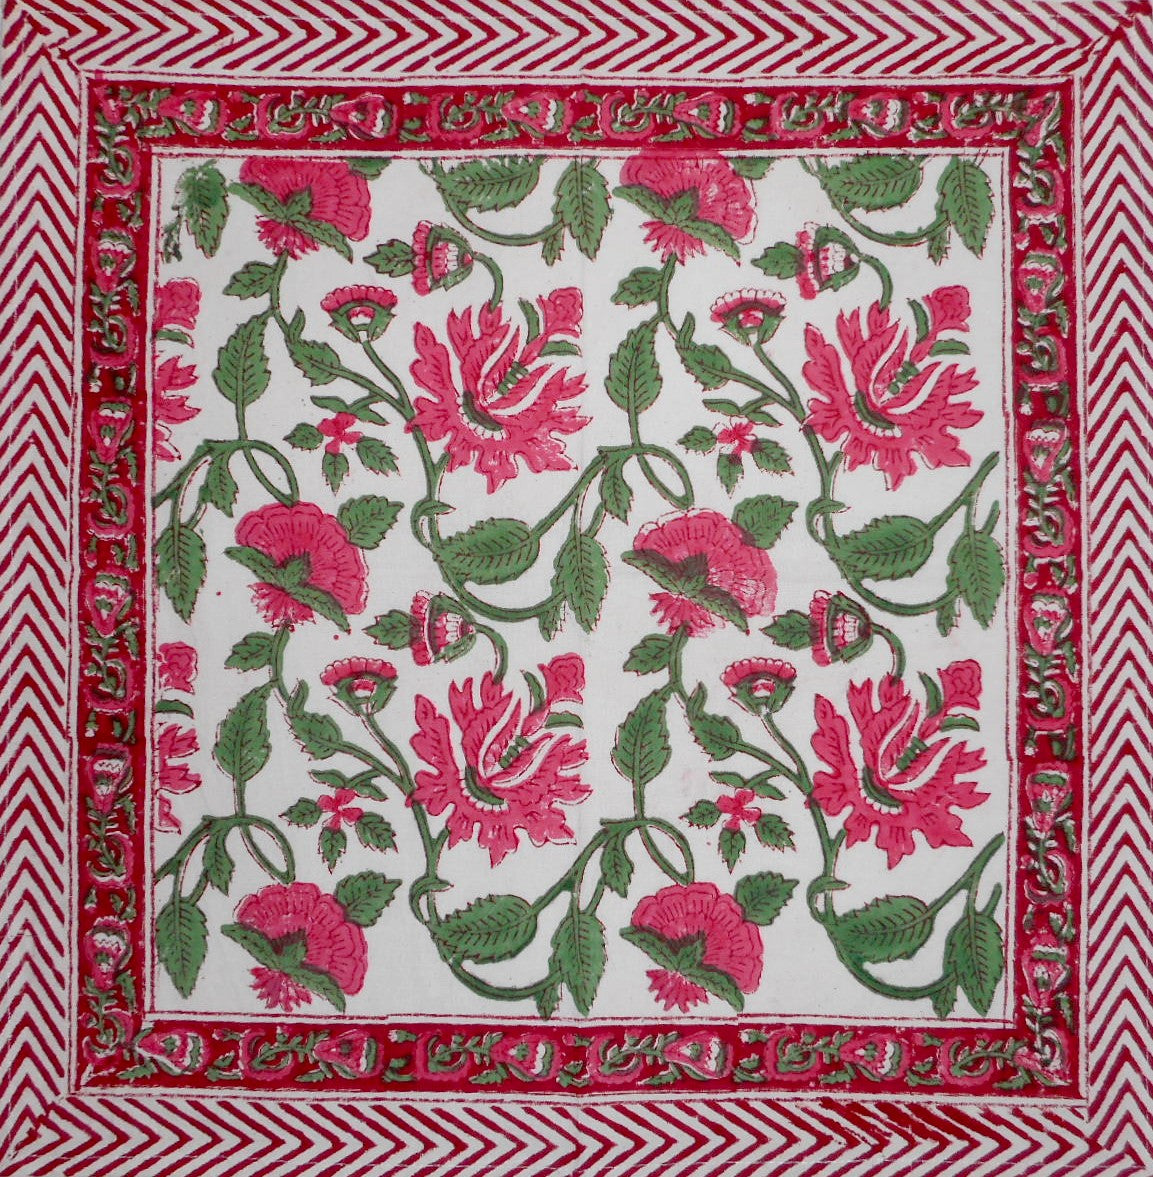 Pretty in Pink Block Print  Cotton Table Napkin 20" x 20" Pink